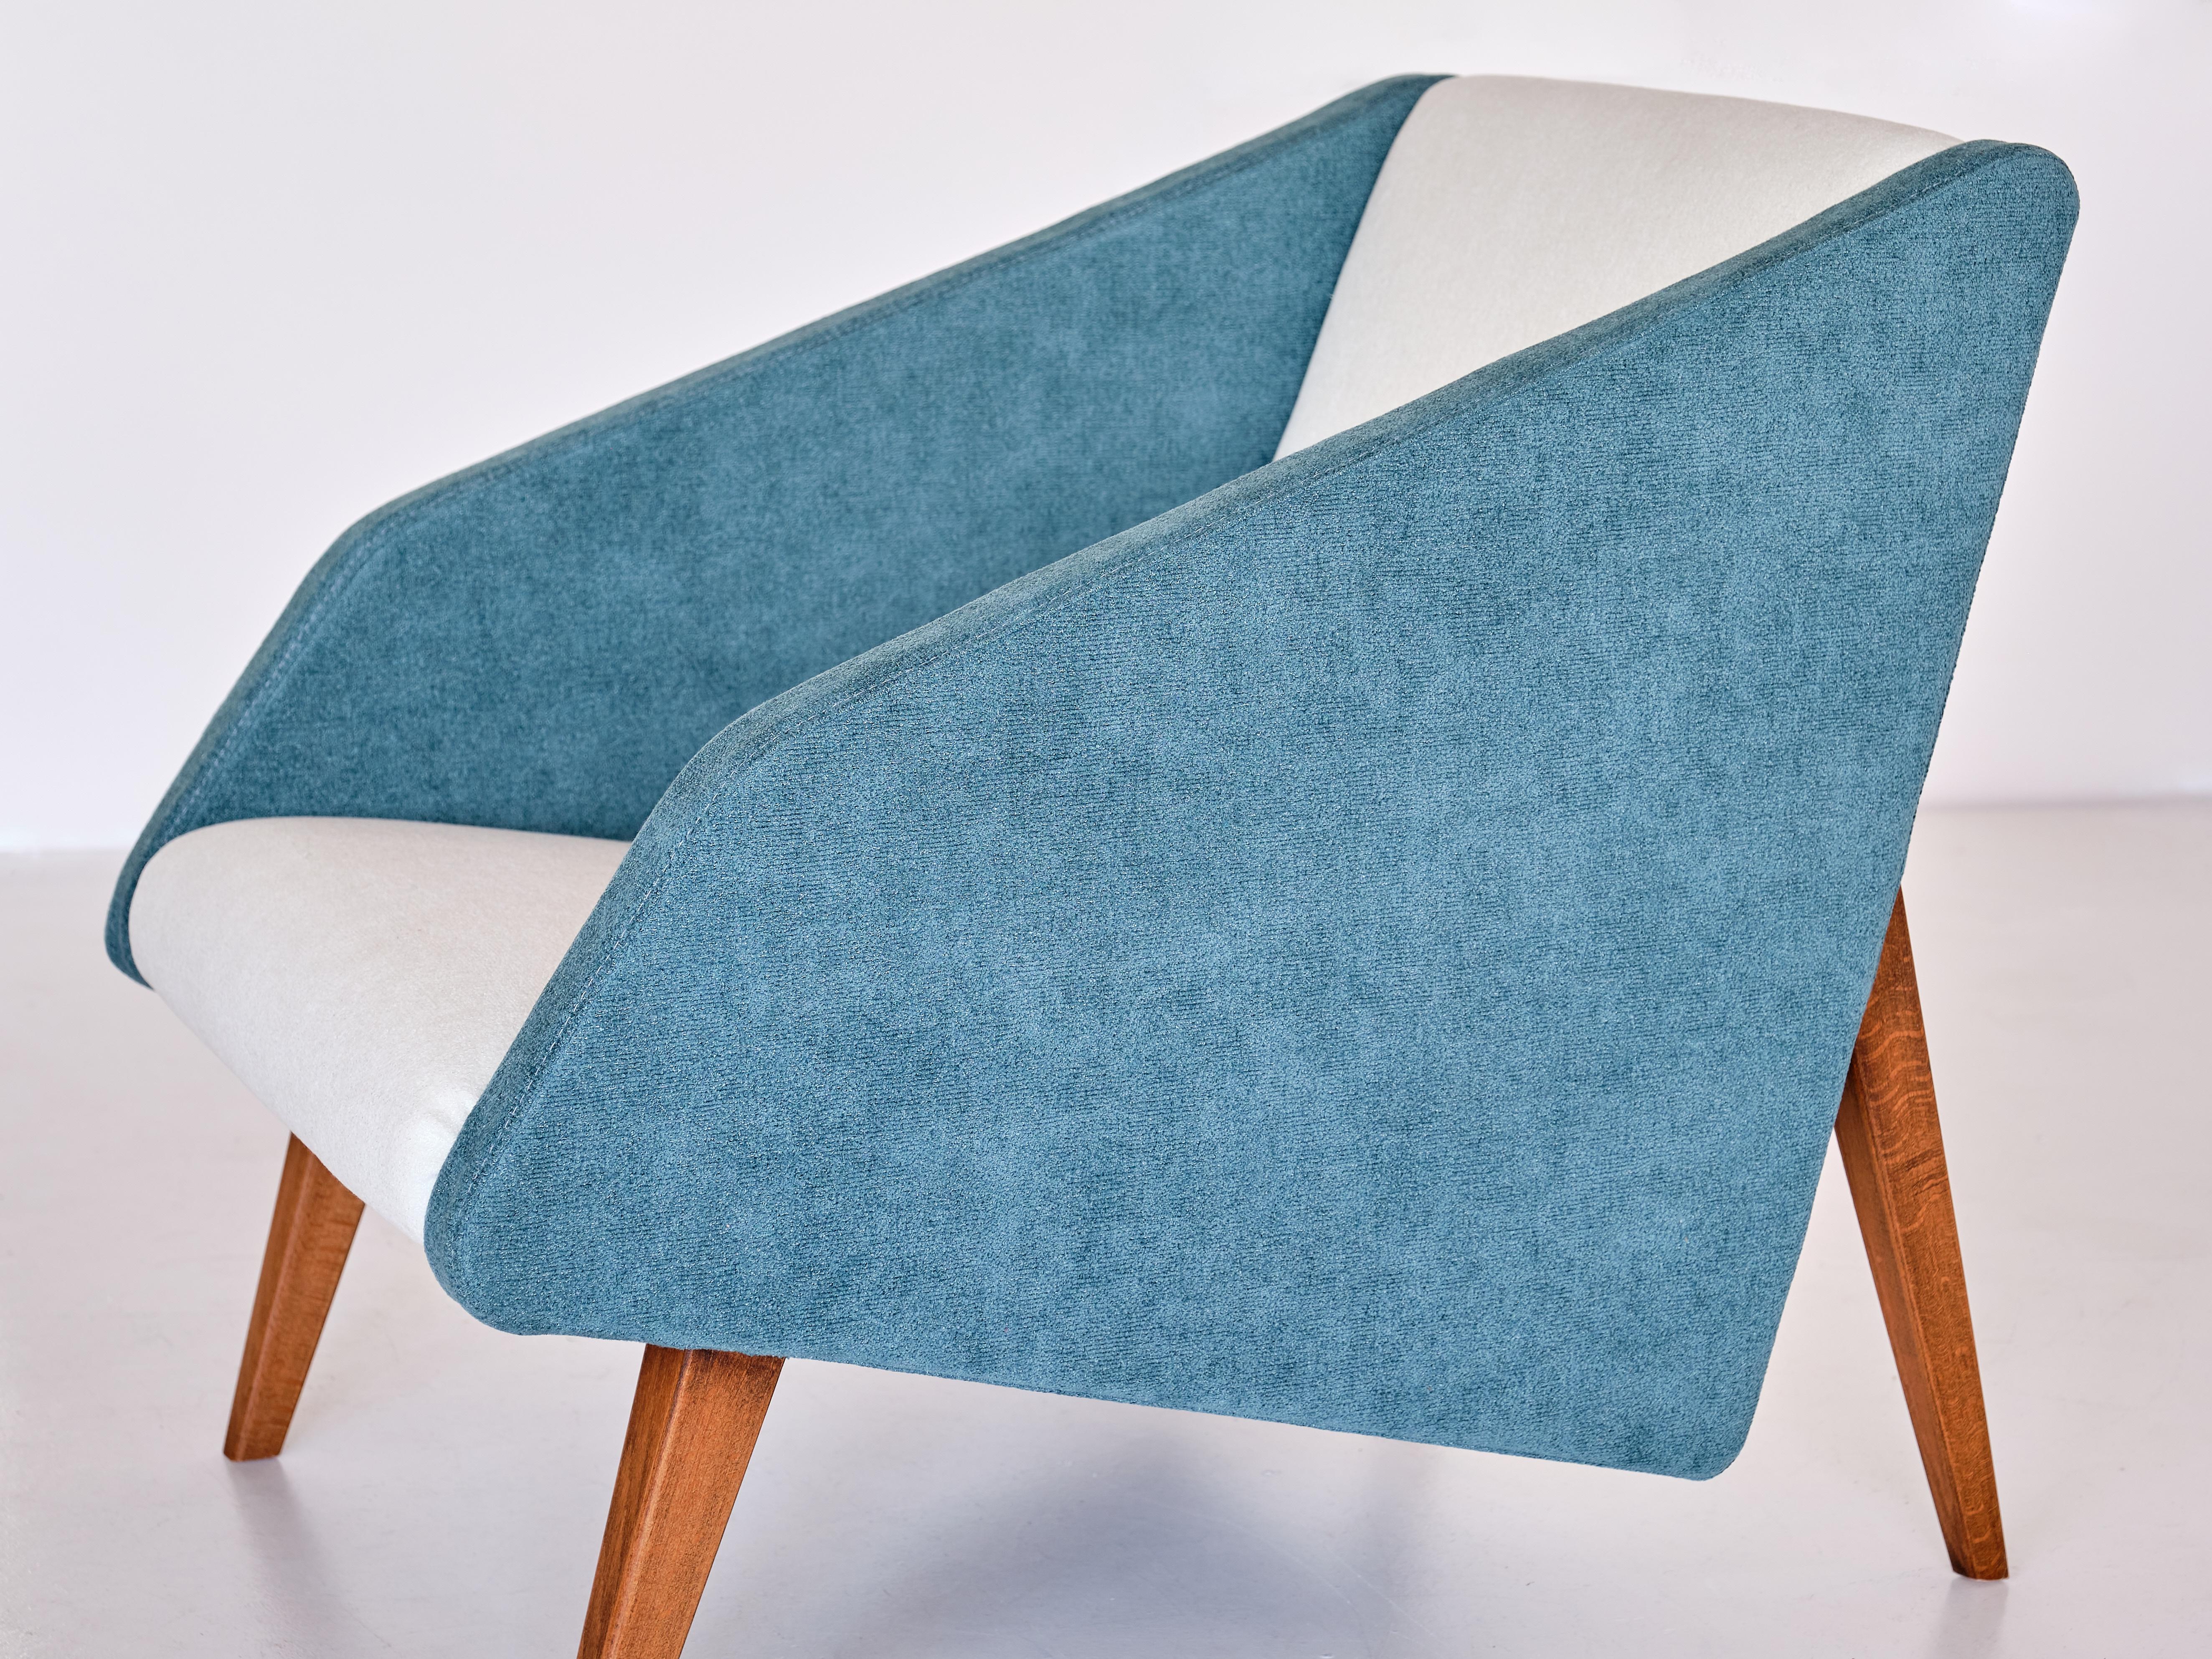 Gio Ponti Attributed Armchair in Lelièvre Fabric and Beech, Italy, Late, 1950s For Sale 2